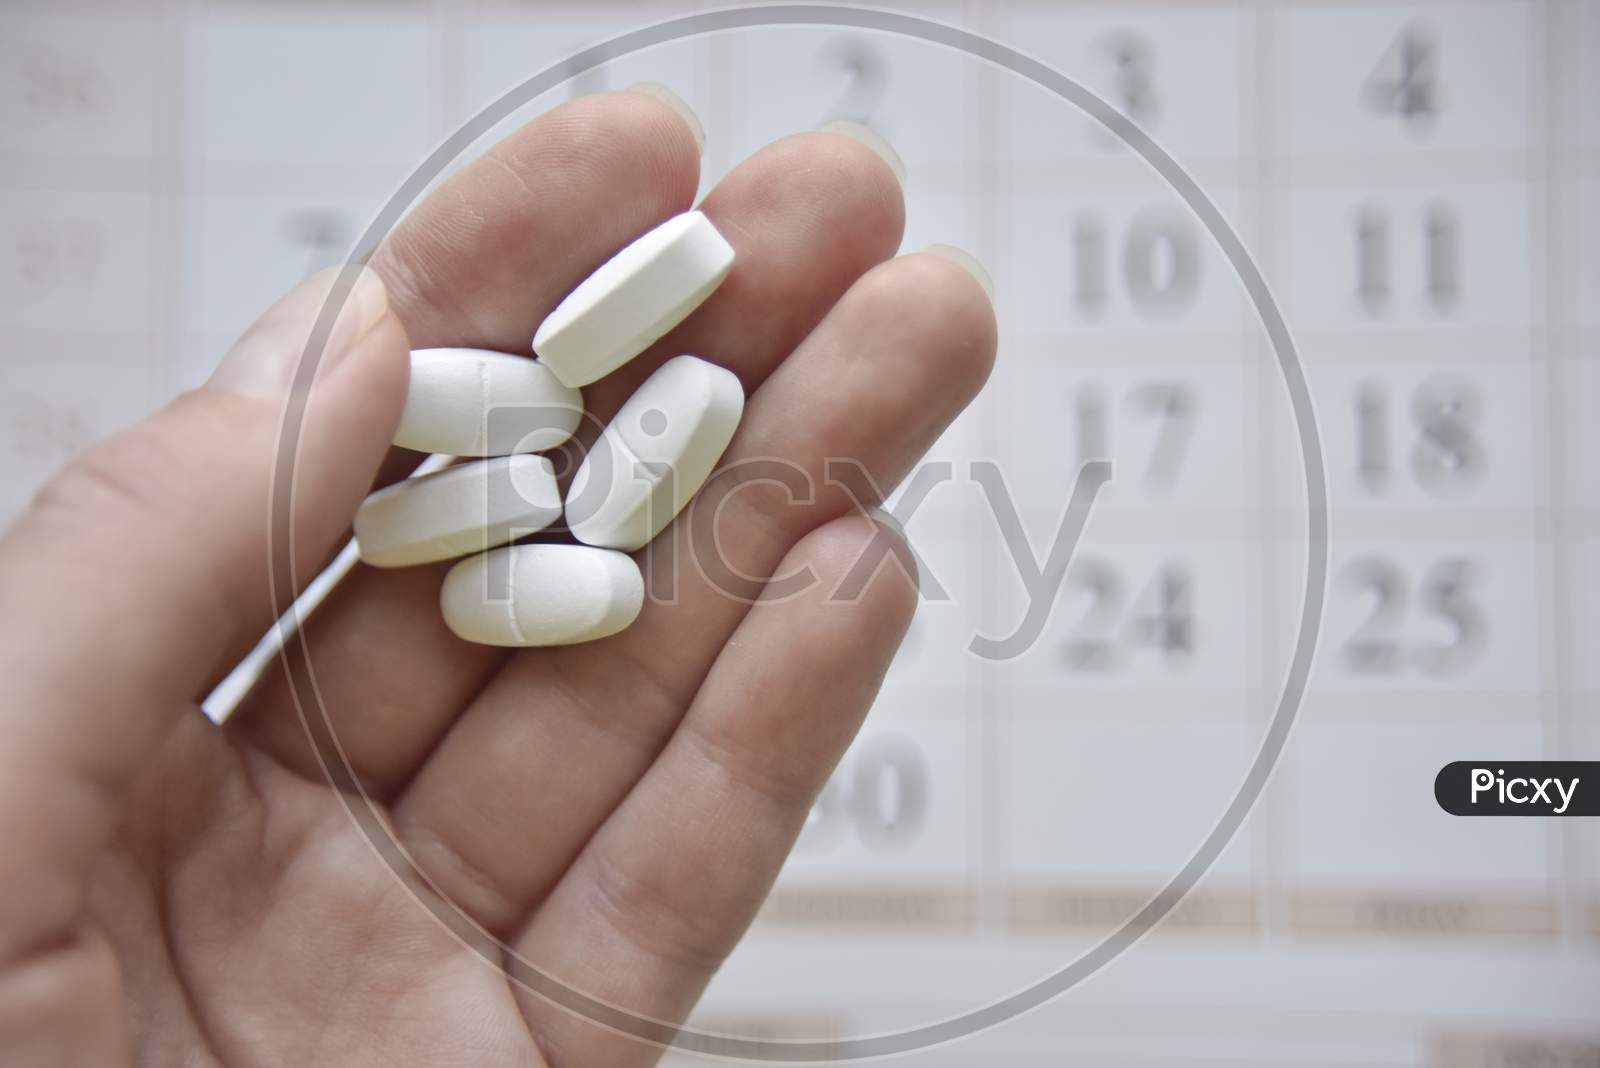 Selective Focus At The Hand And Pills With The Blurred Calendar At The Background